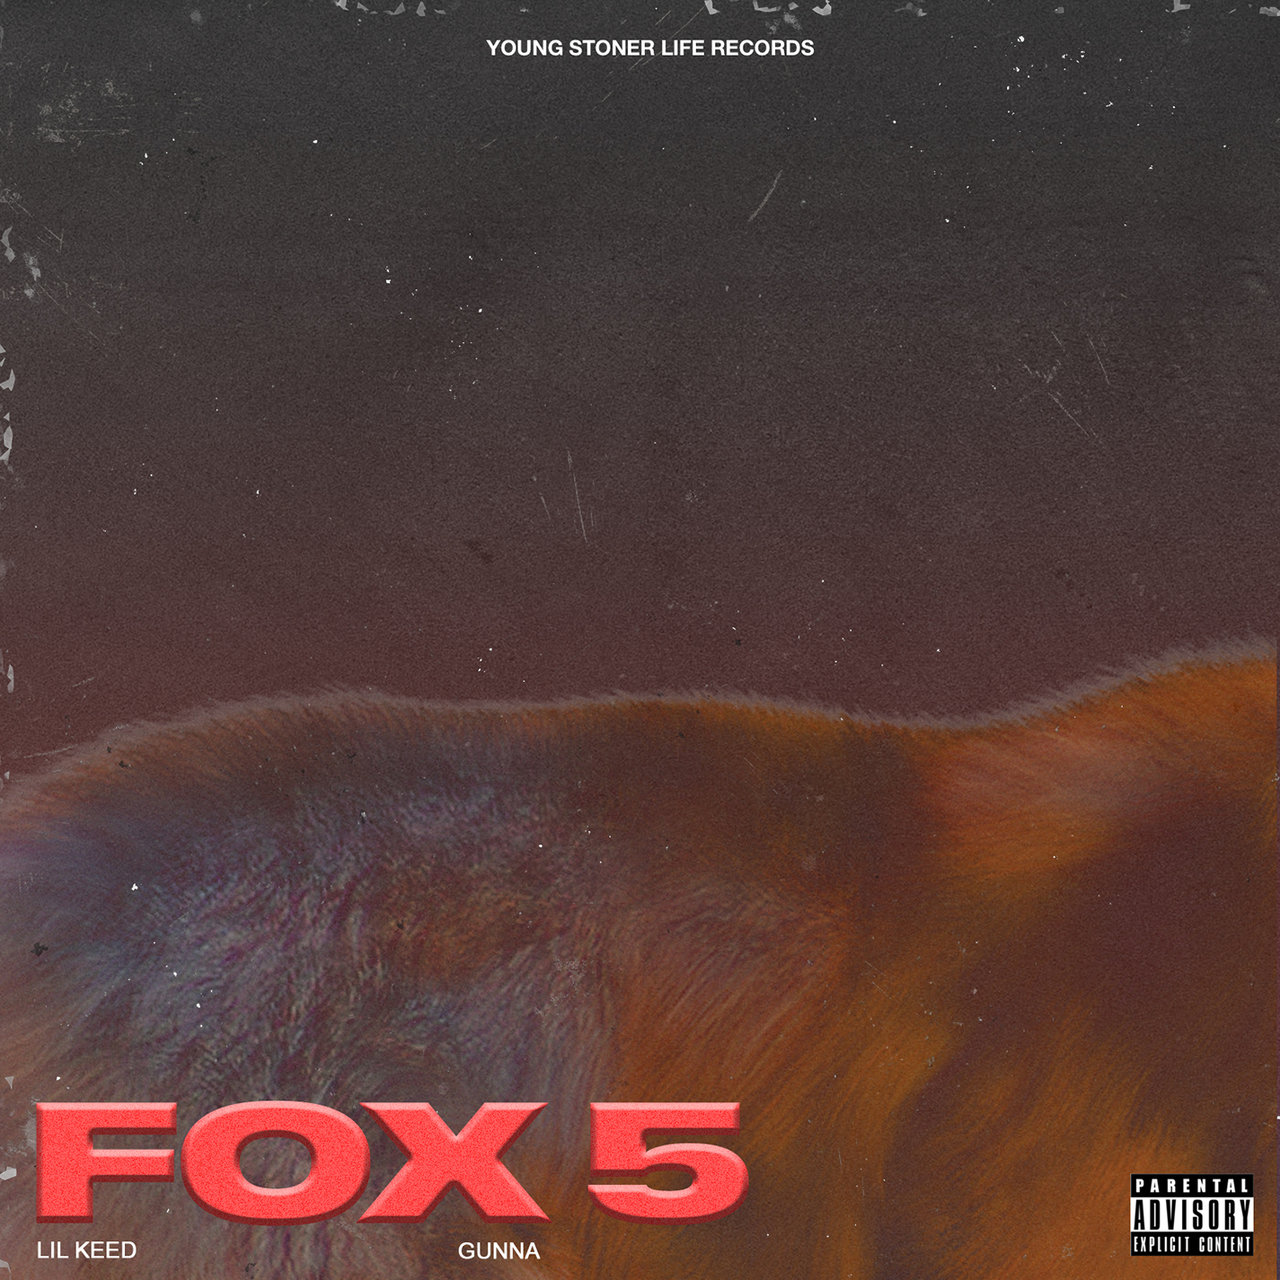 Lil Keed - Fox 5 (ft. Gunna) (Cover)